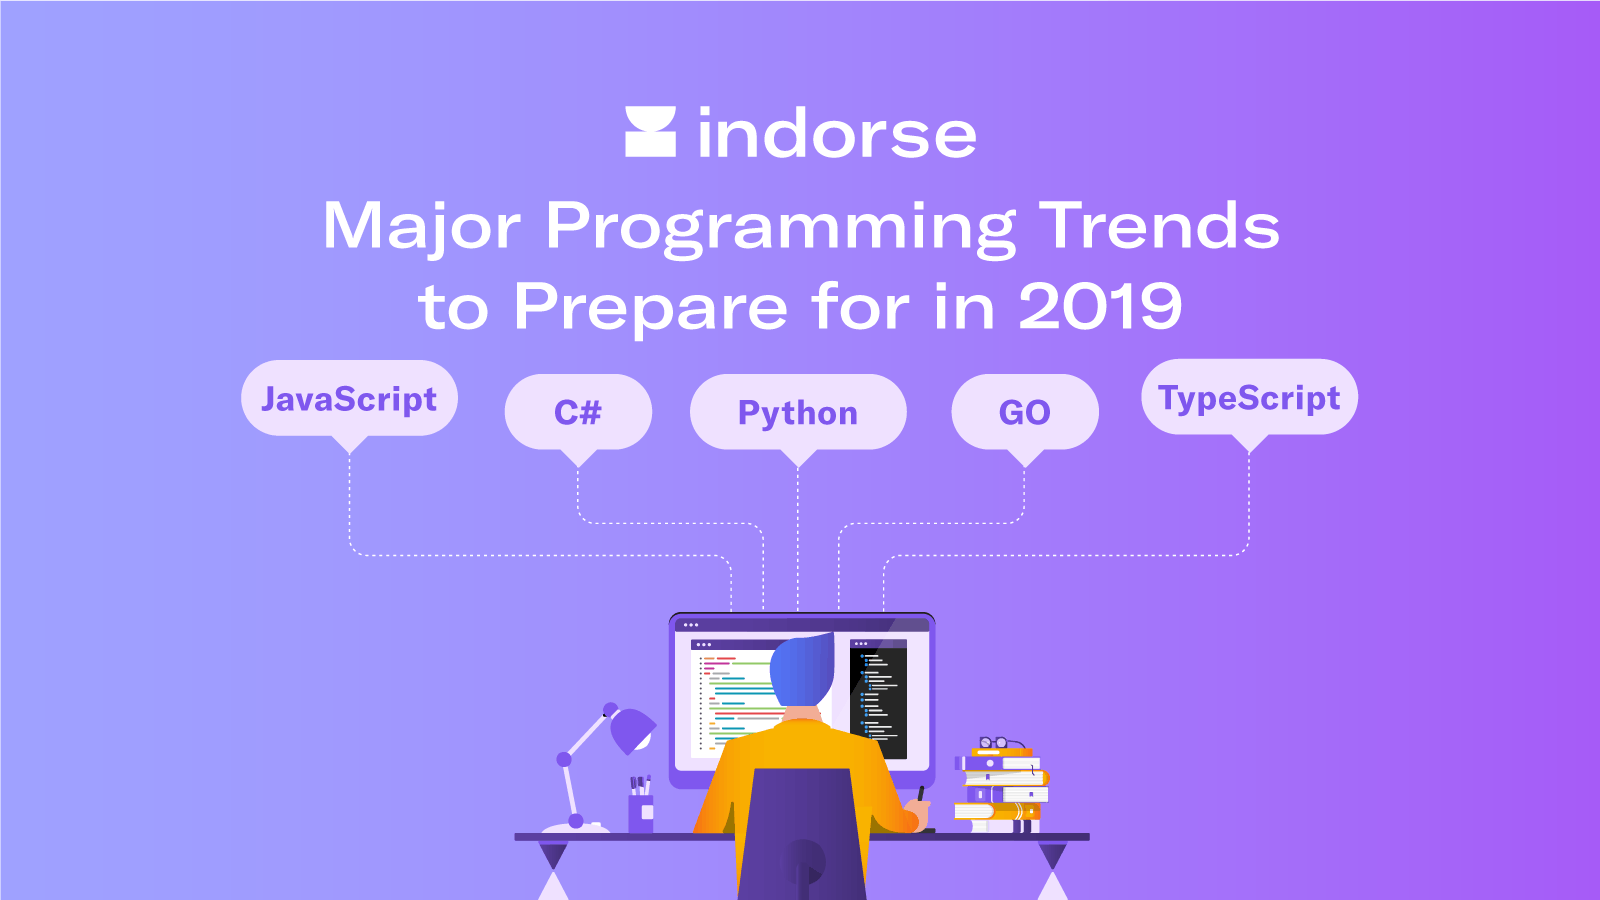 /major-programming-trends-to-prepare-for-in-2019-169987cc75f4 feature image